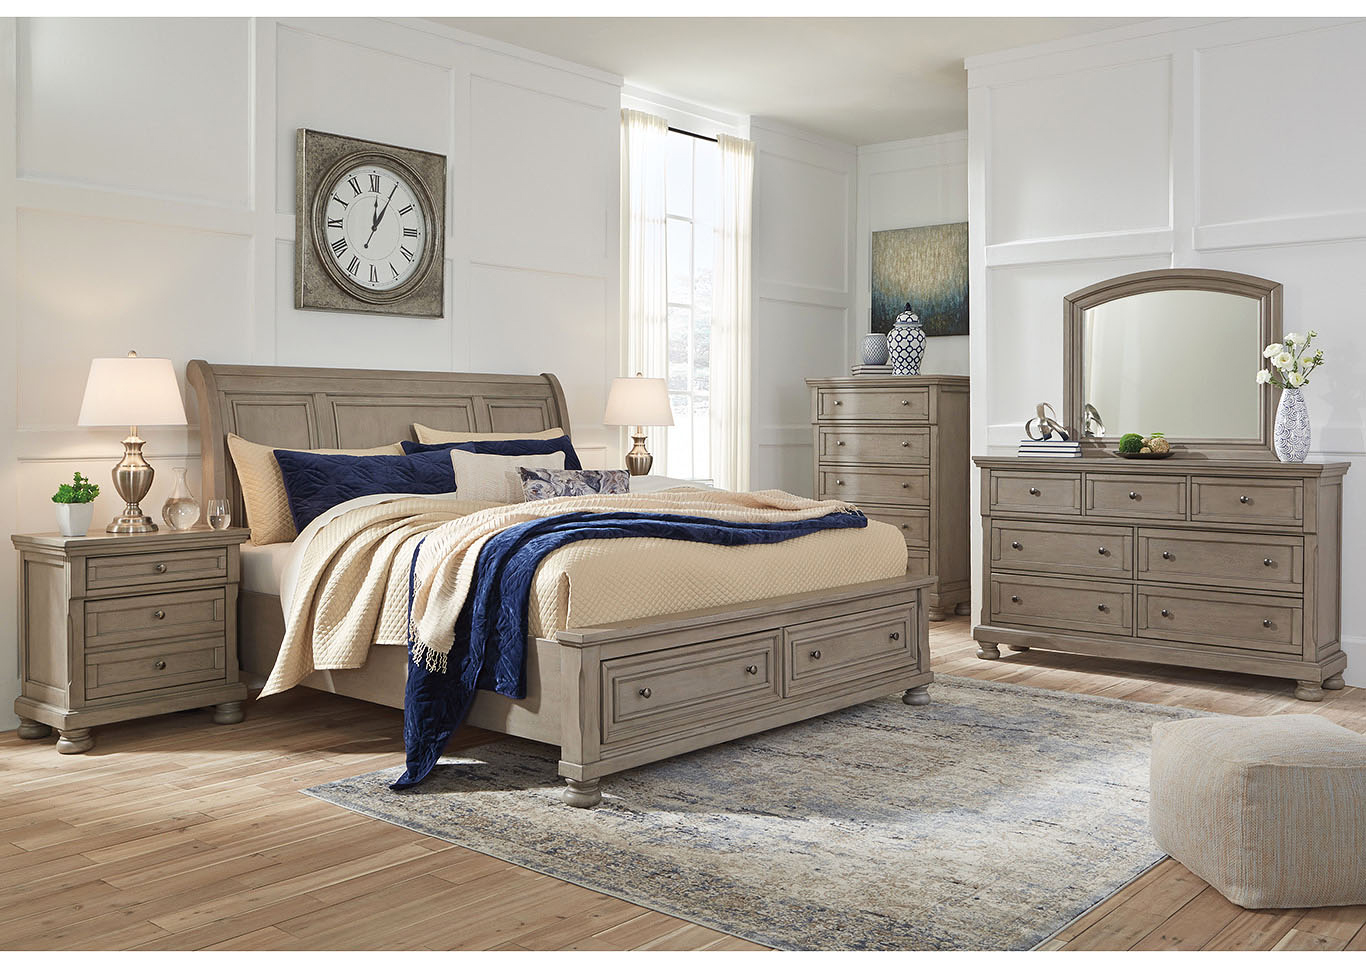 bedroom furniture stores newcastle nsw